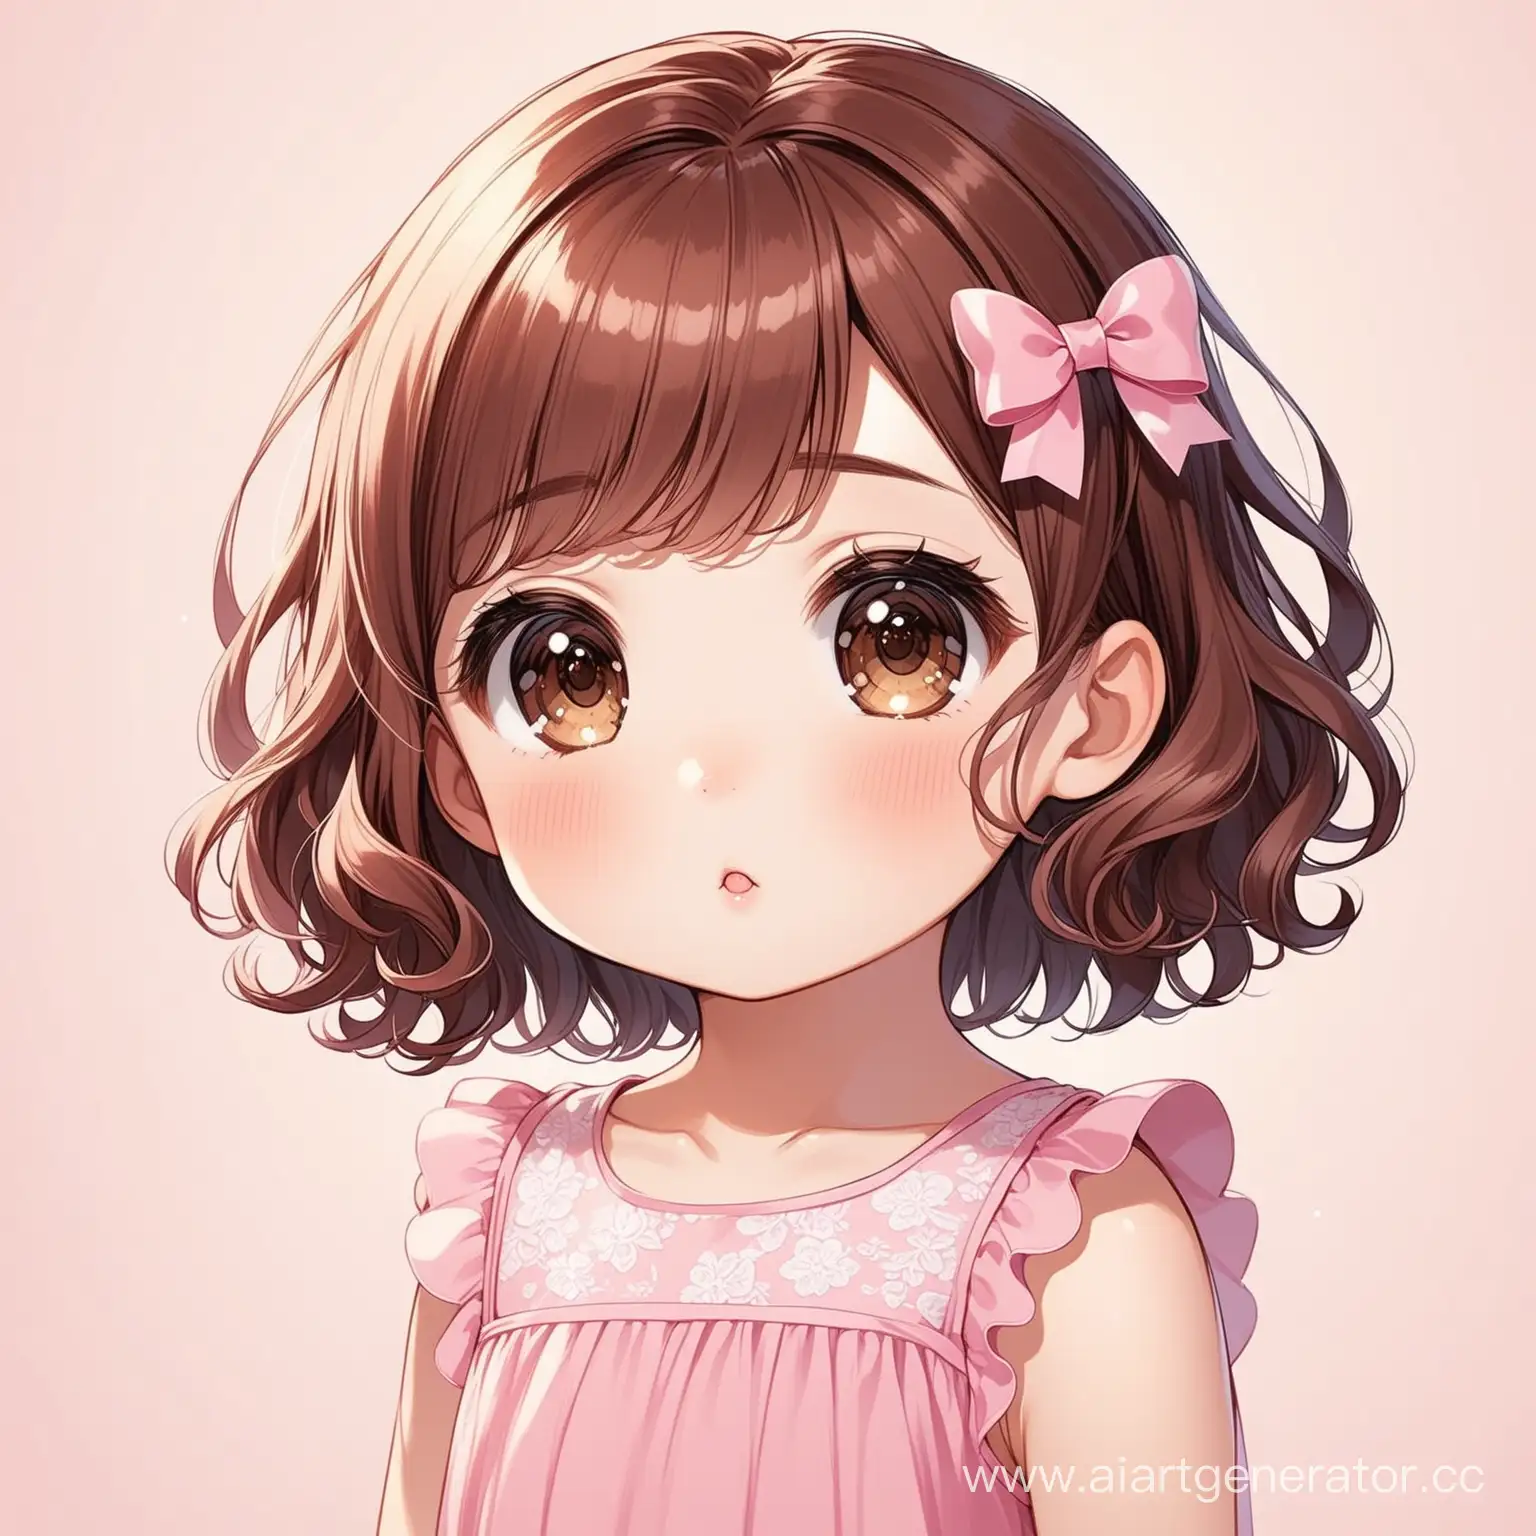 Adorable-Little-Girl-with-Brown-Curly-Hair-and-Pink-Dress